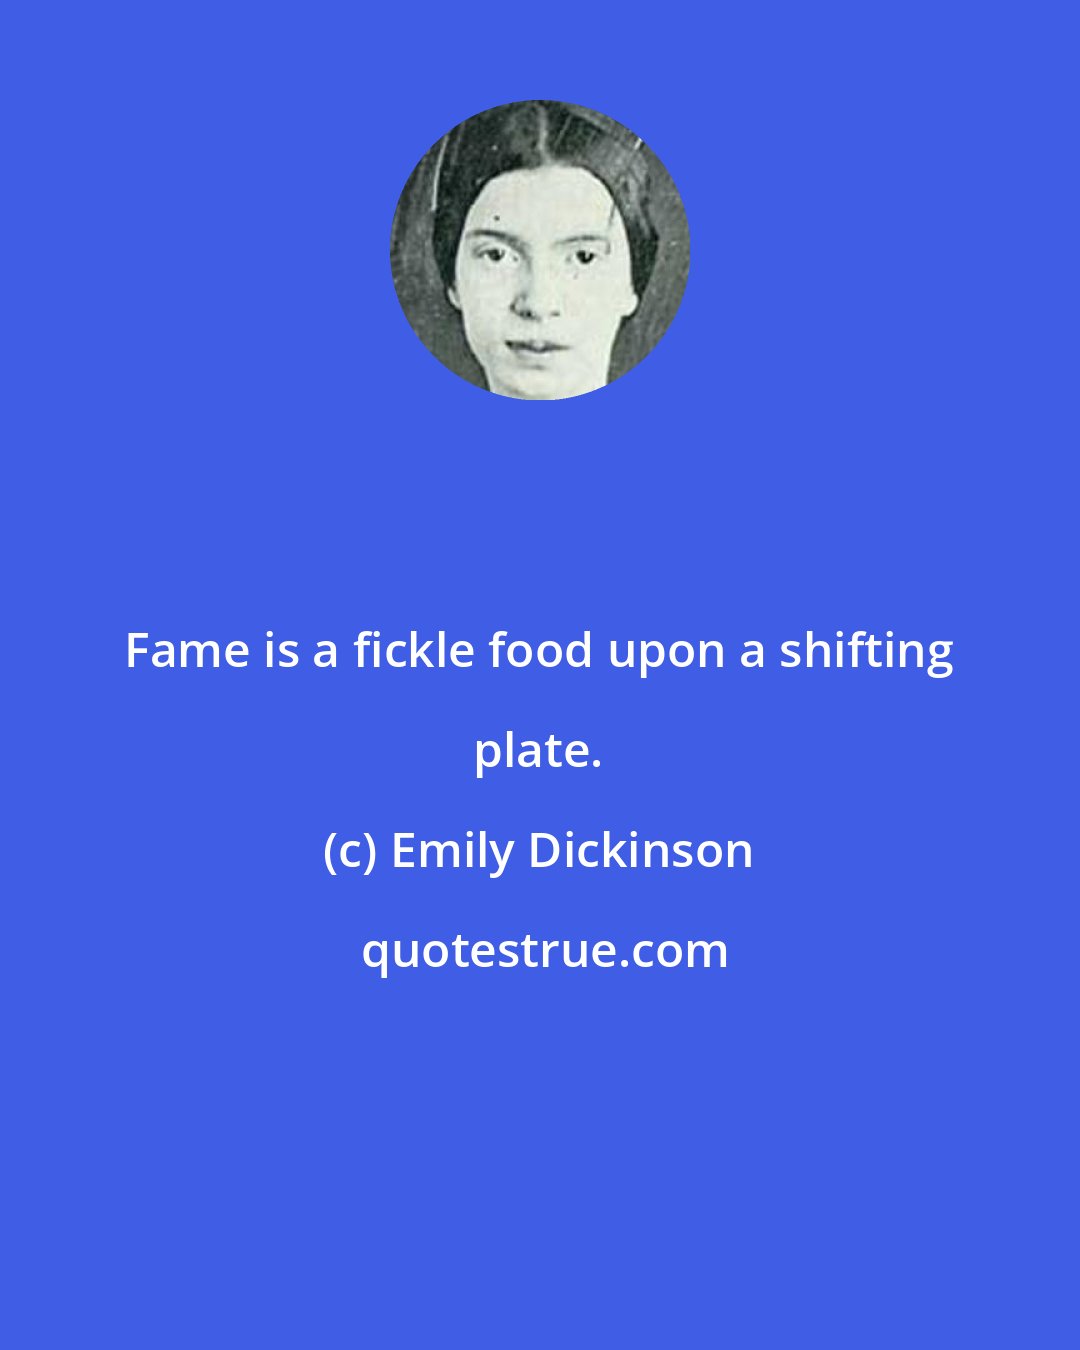 Emily Dickinson: Fame is a fickle food upon a shifting plate.